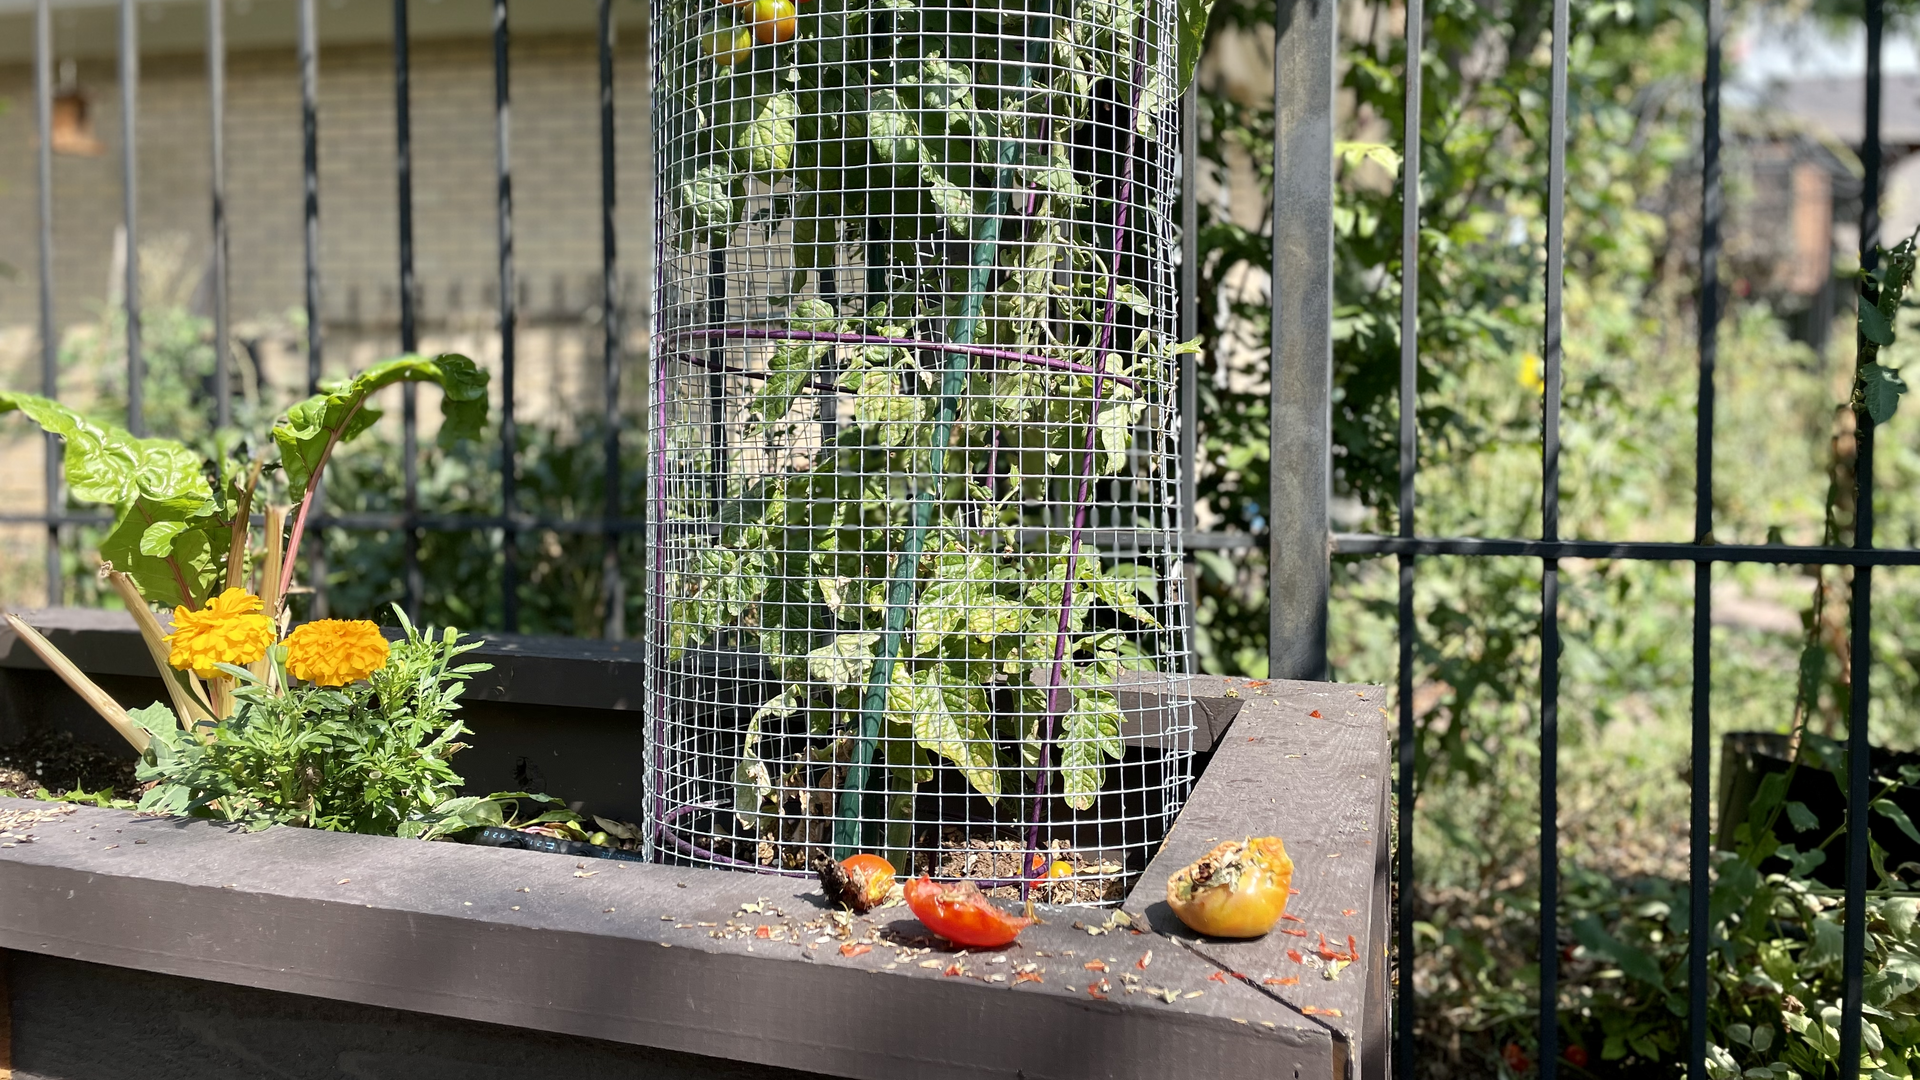 Squirrels leave their mark on the garden by eating tomatoes. Photo: John Frank/Axios